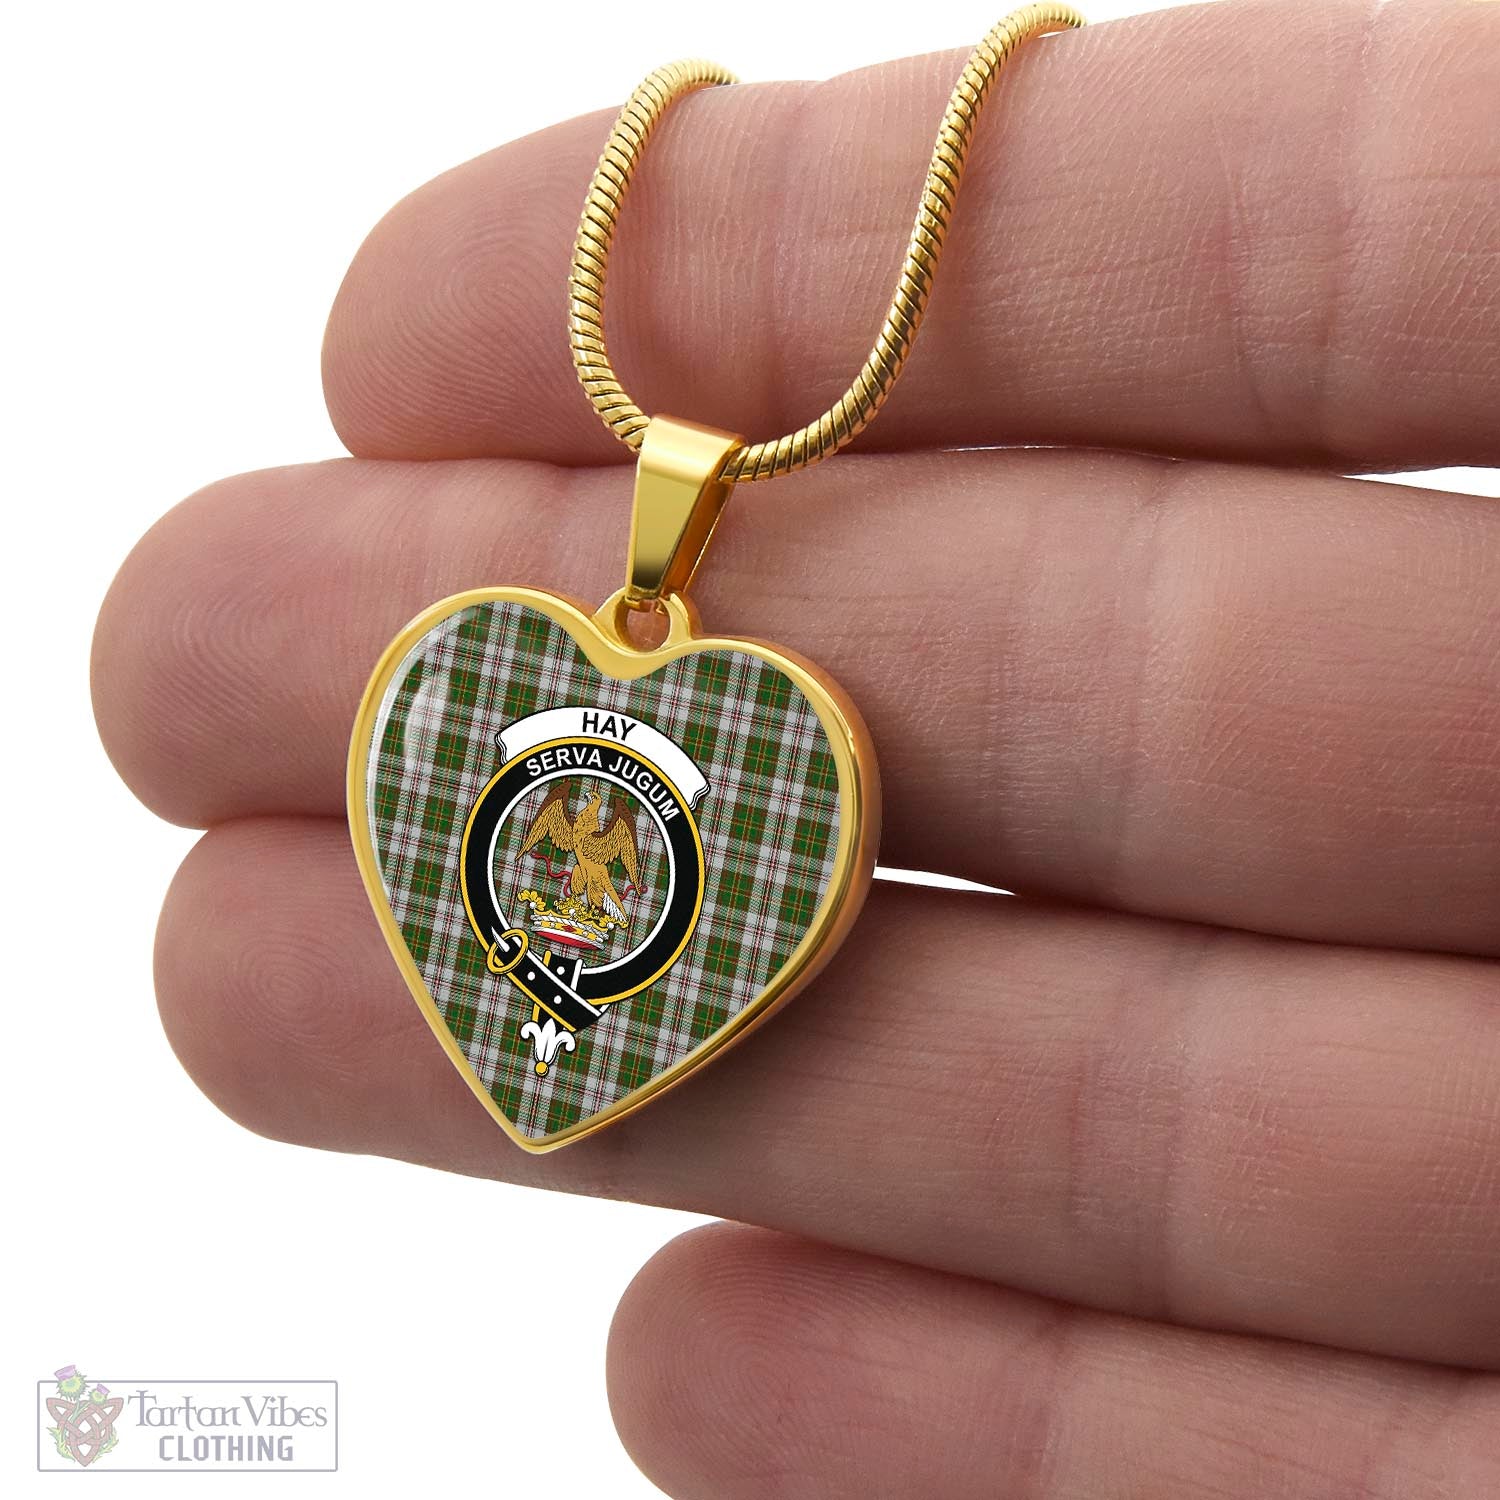 Tartan Vibes Clothing Hay White Dress Tartan Heart Necklace with Family Crest